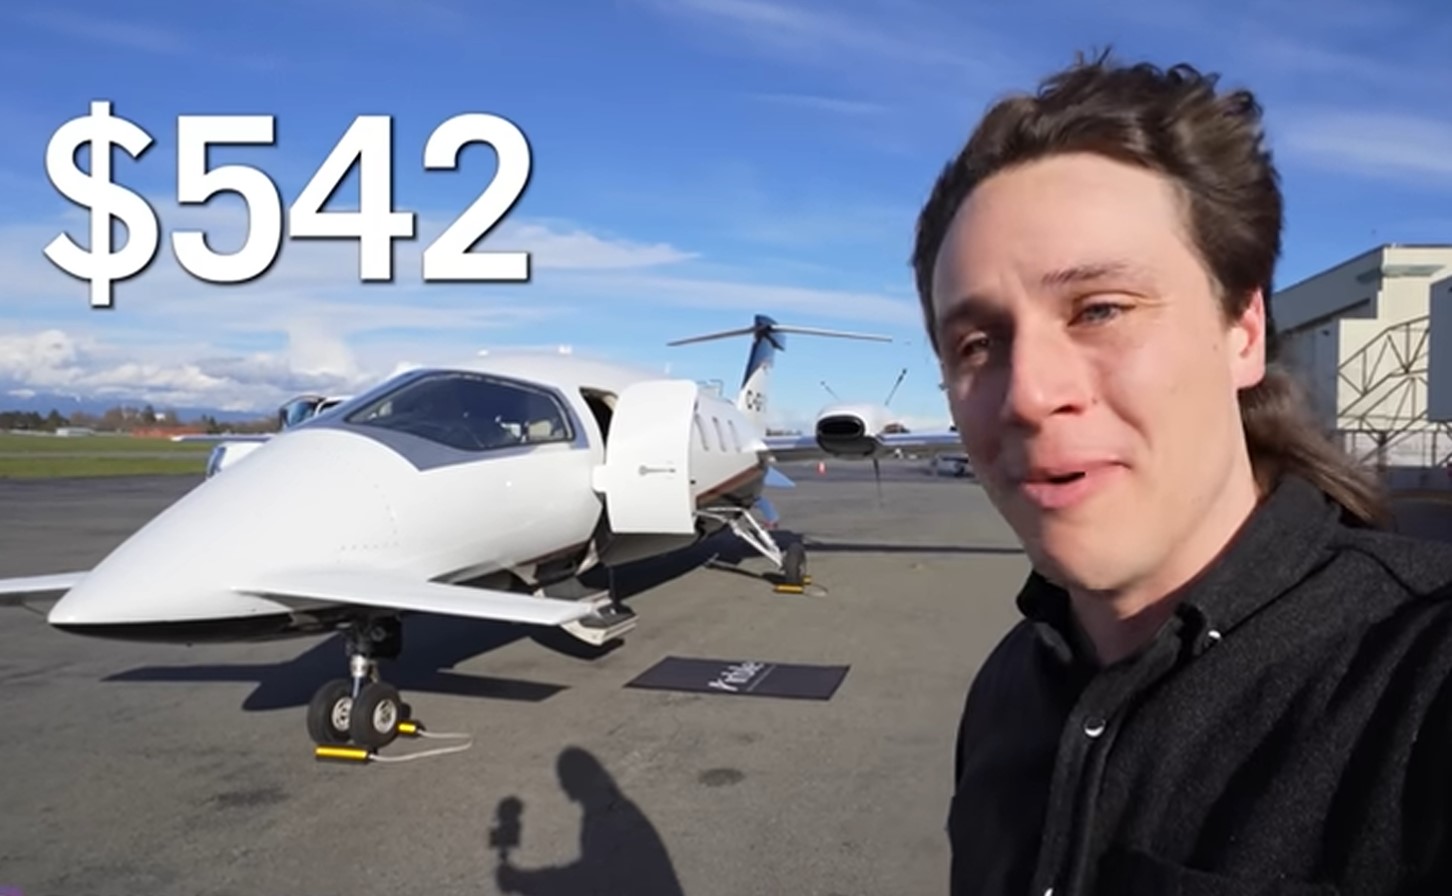 YouTuber stuns people by using 'Uber' private jet service worth over $500 1